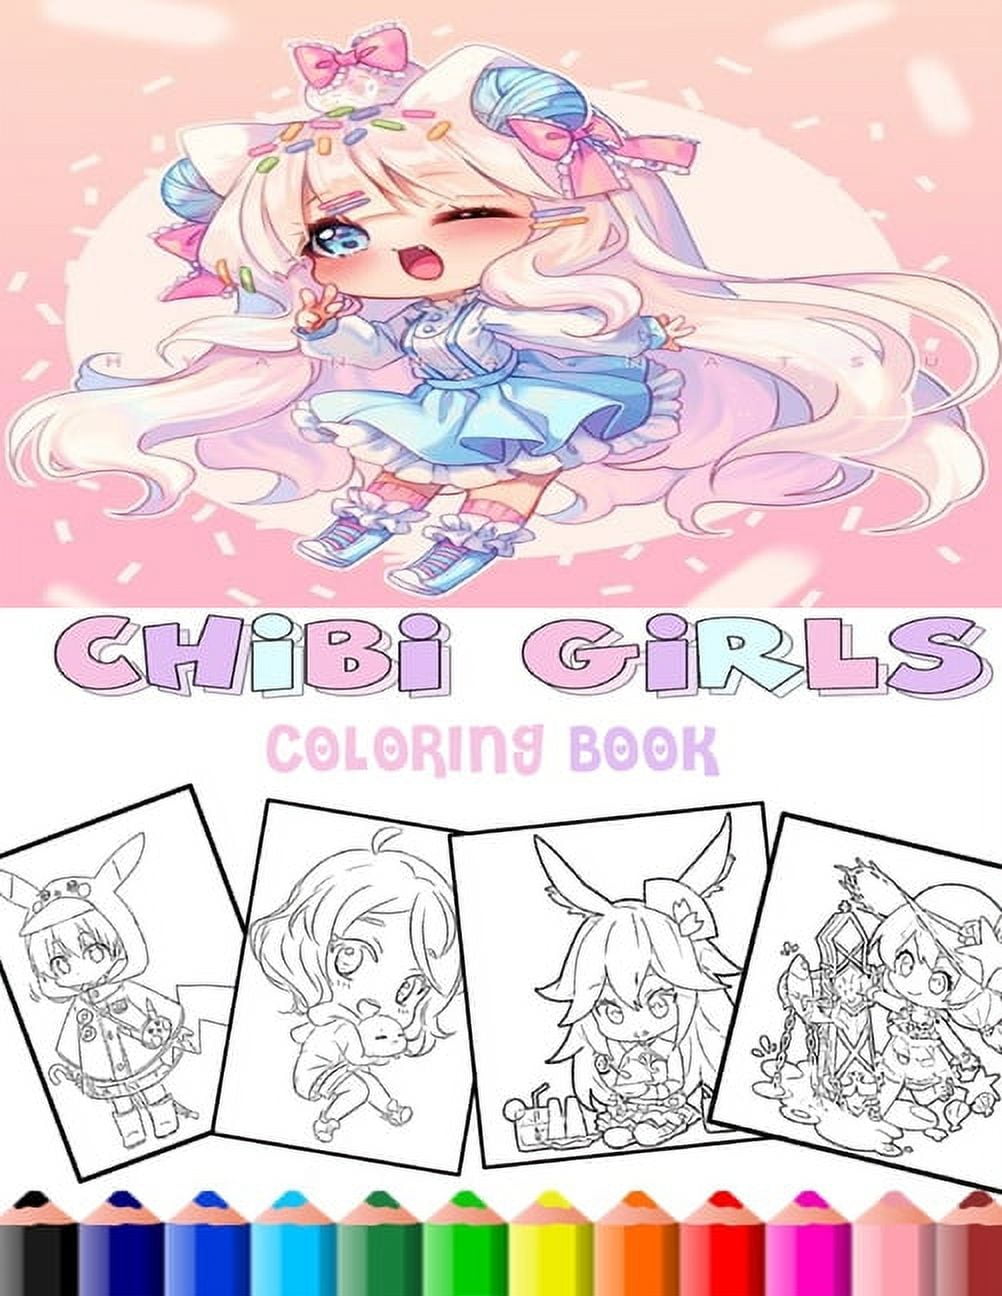 Cute Anime Girls: Chibi Magic: Adorable Manga Girls of Cute and  Fantasy-Inspired Anime Characters (Anime Coloring Books 90 pages)